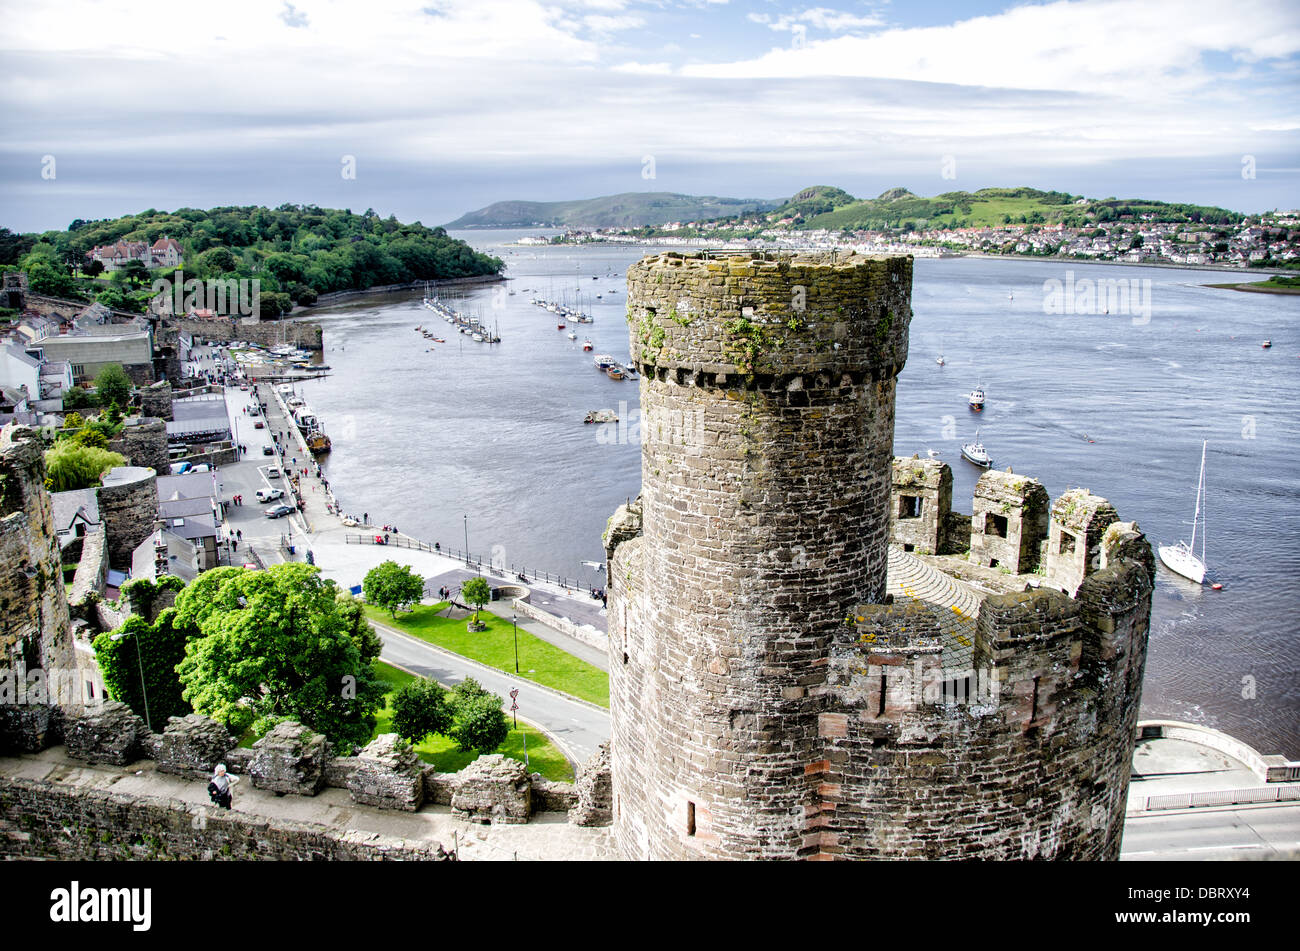 CONWY, Wales - Conwy Castle is a medieval castle built by Edward I in the late 13th century. It forms part of a walled town of Conwy and occupies a strategic point on the River Conwy. It is listed as a World Heritage Site. Stock Photo